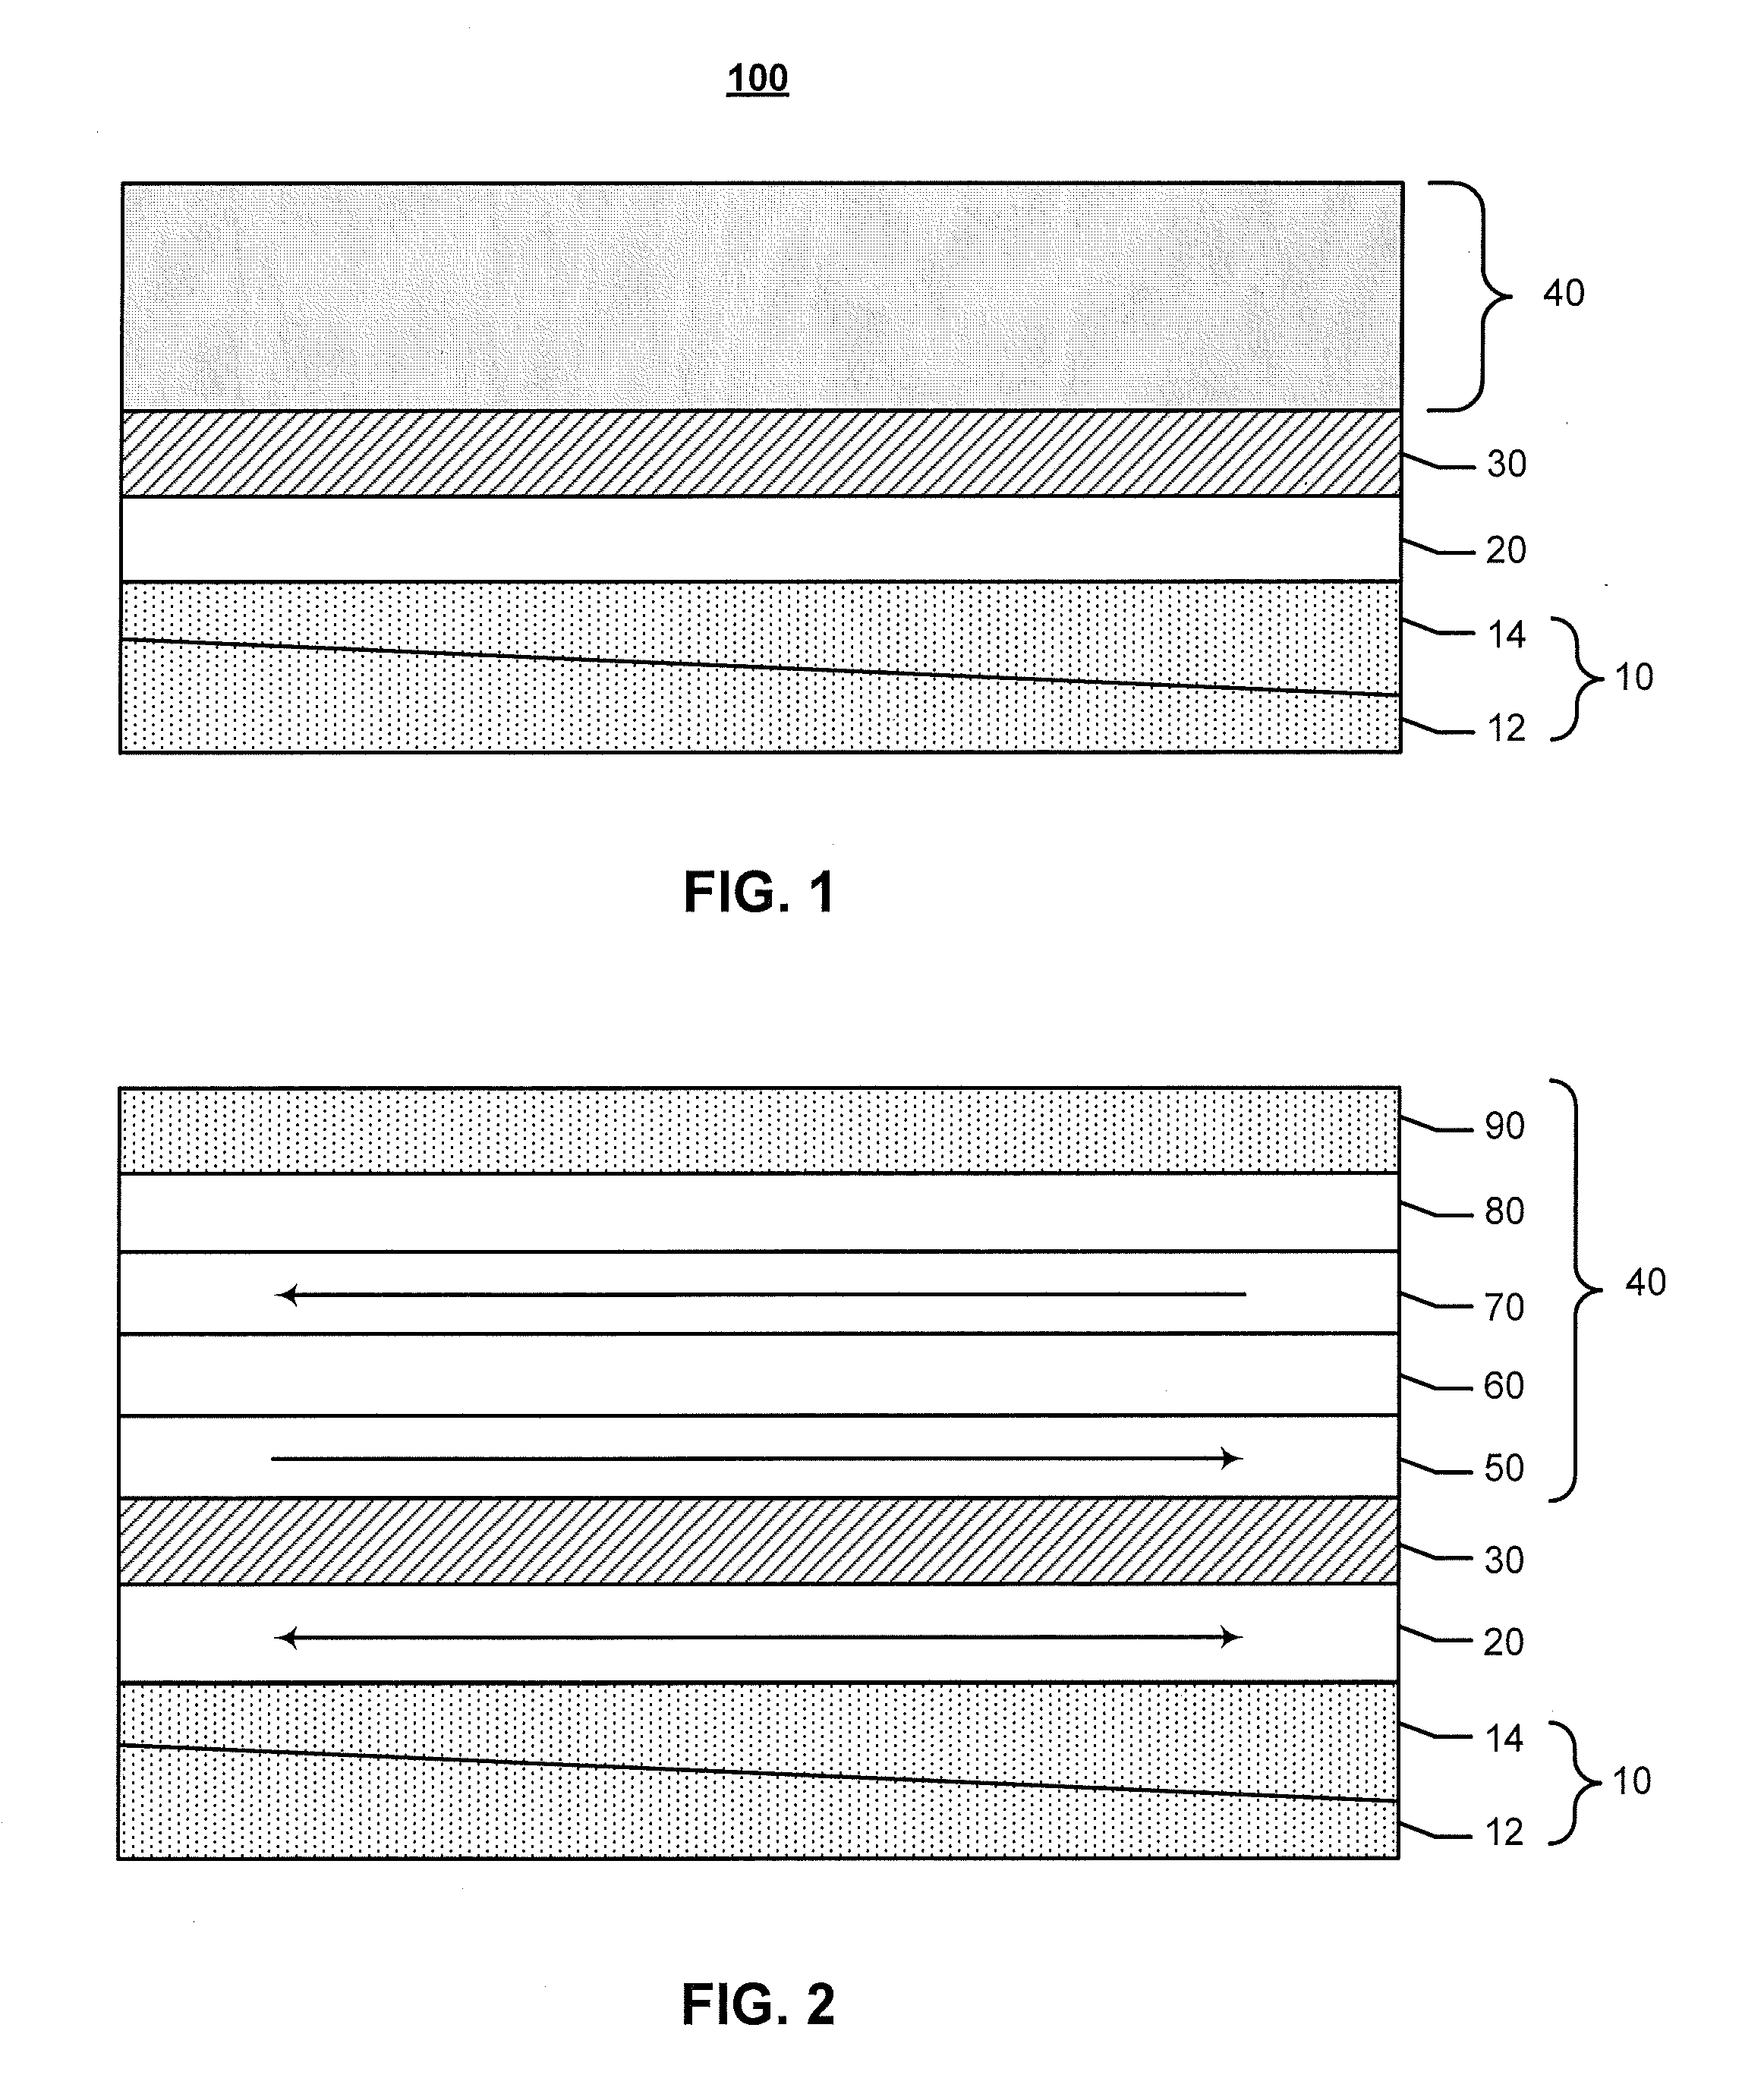 Magnetic tunnel junction devices having magnetic layers formed on composite, obliquely deposited seed layers